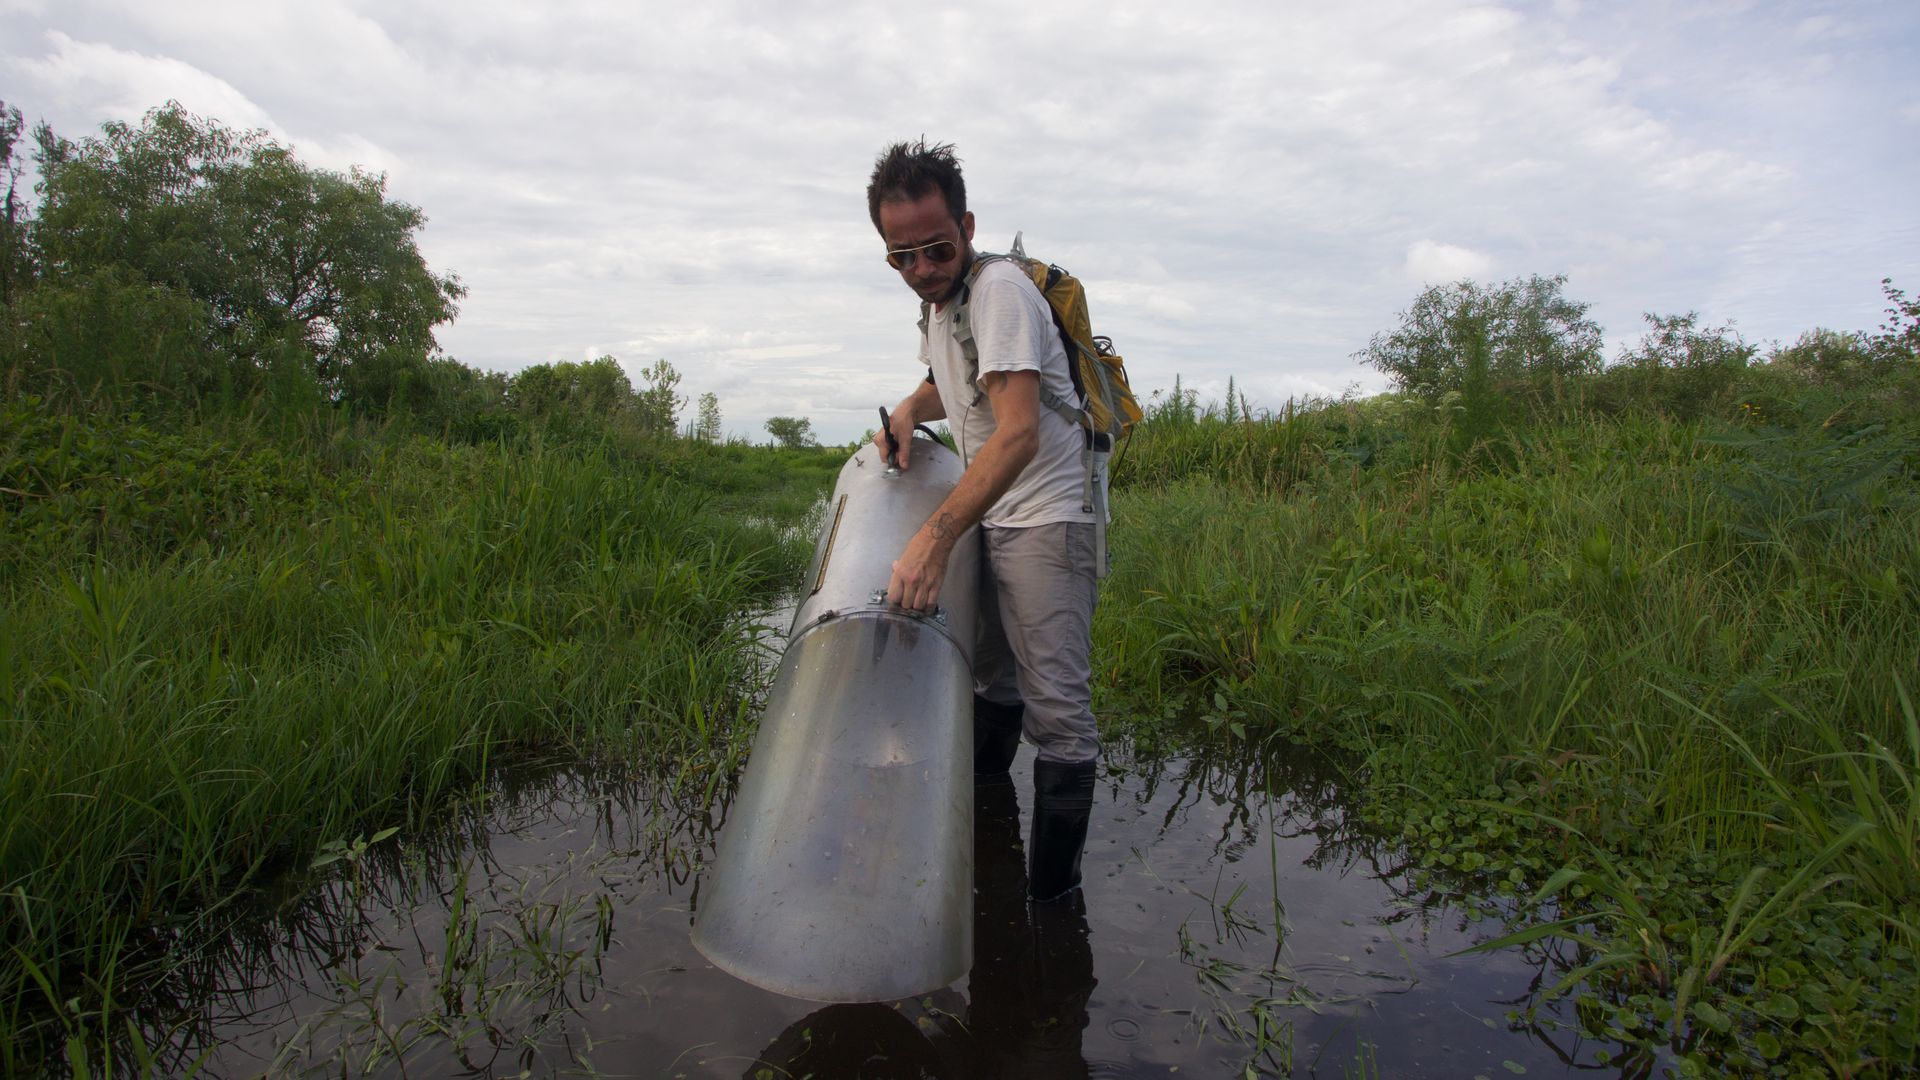 Mosquito biologist Lawrence Reeves uses an aspirator machine to collect mosquitoes.